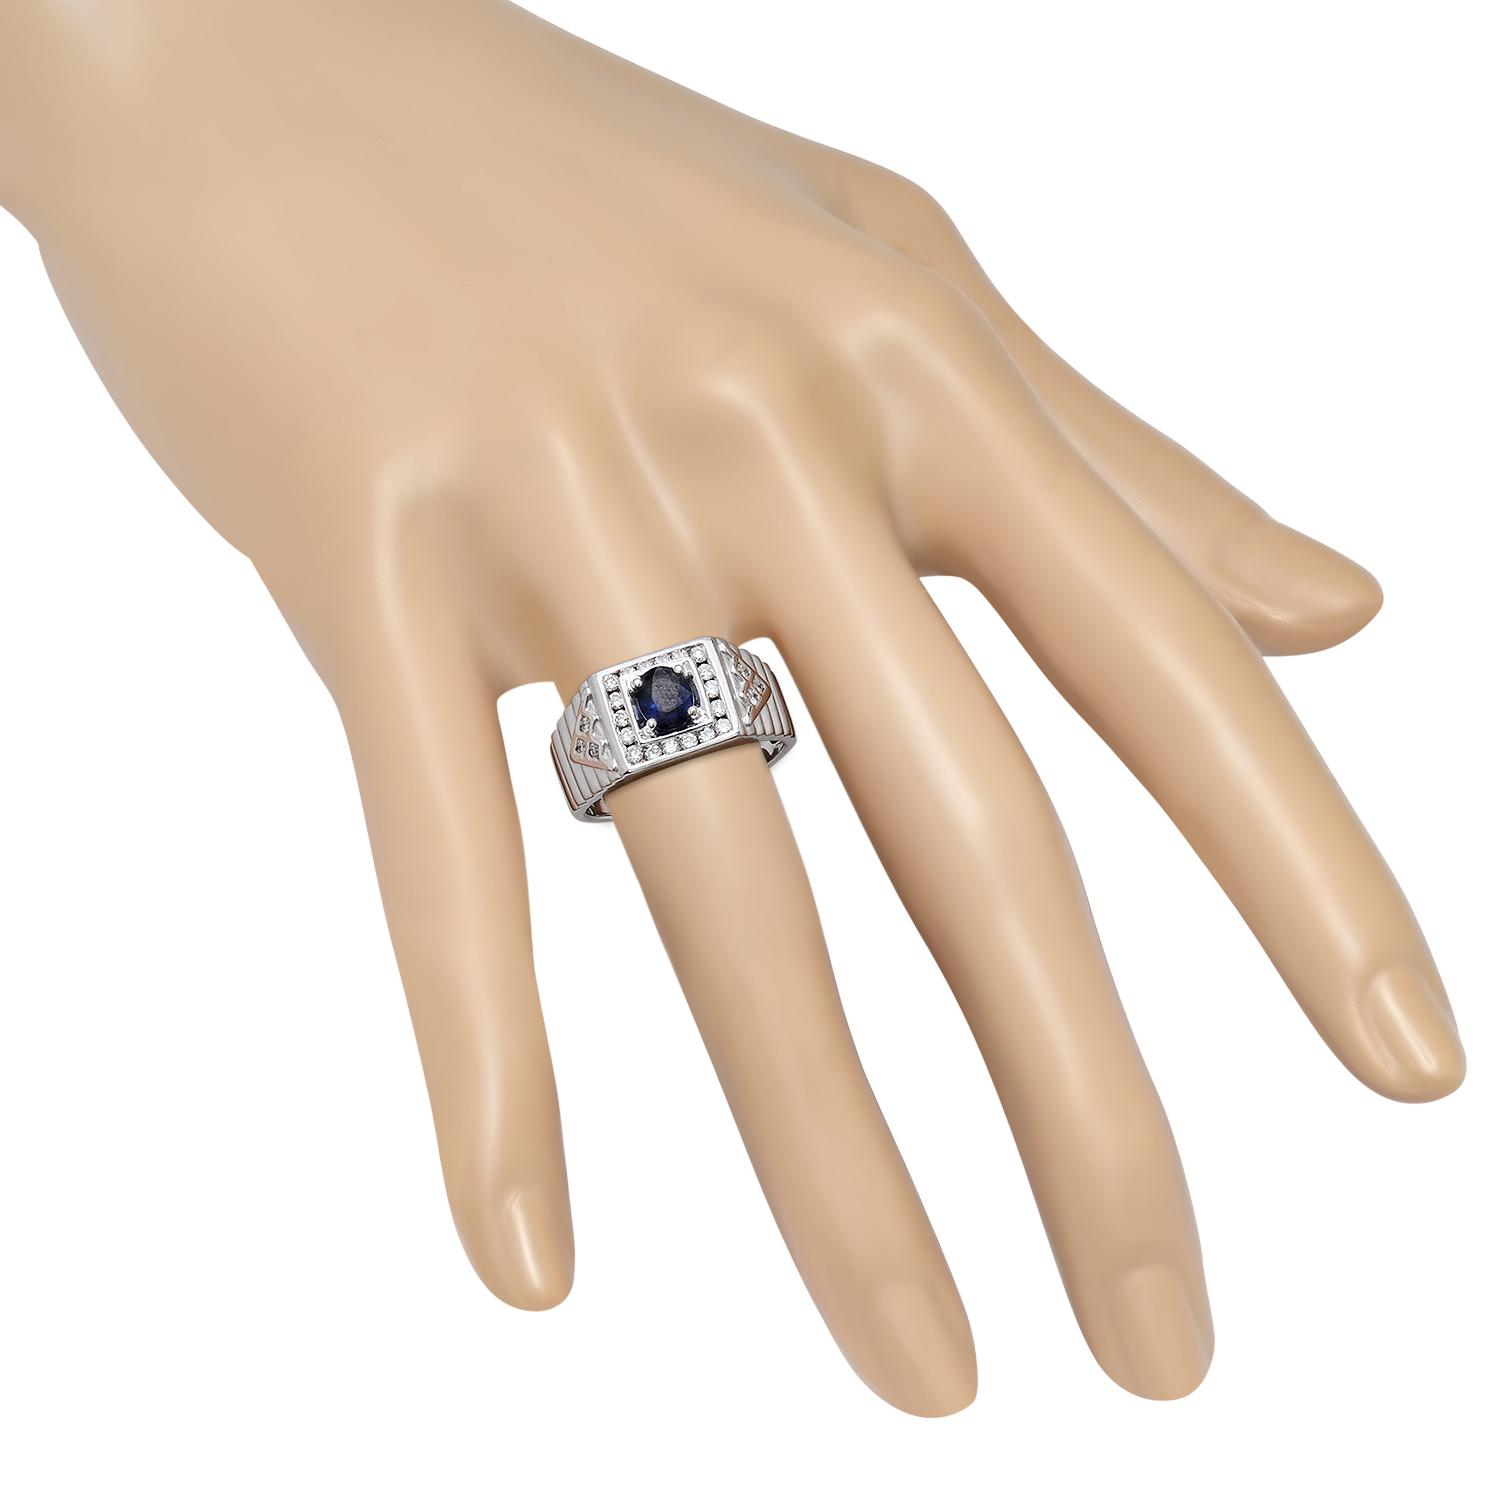 18K White Gold Setting with 0.63ct Sapphire and 0.36ct Diamond Ladies Ring